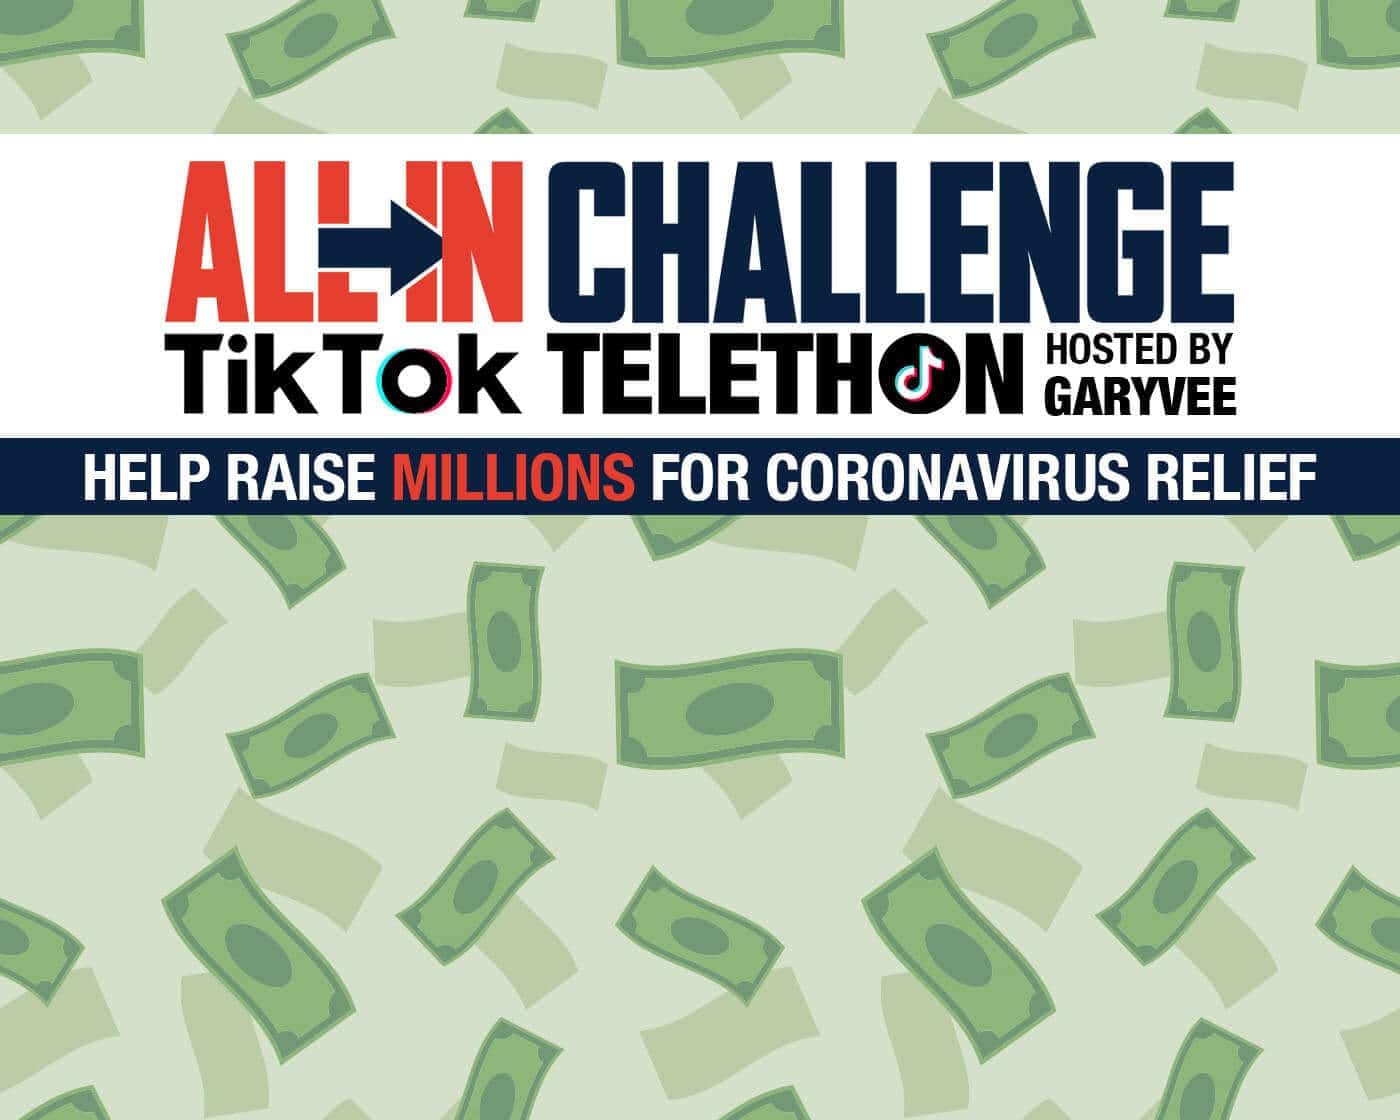 Announcing the All In Challenge TikTok Telethon